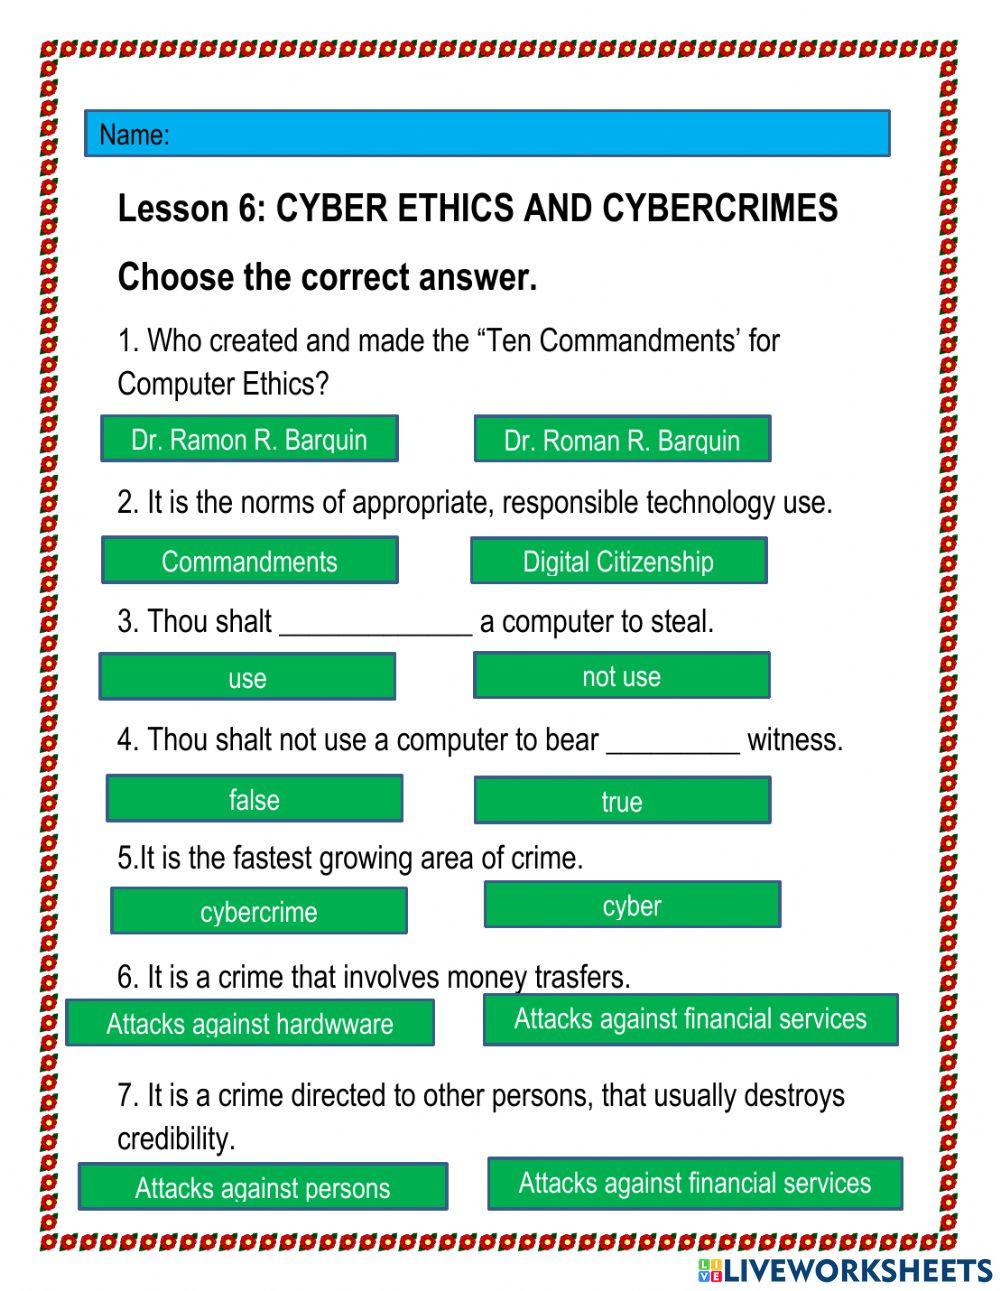 Cyber Ethics and Cybercrime